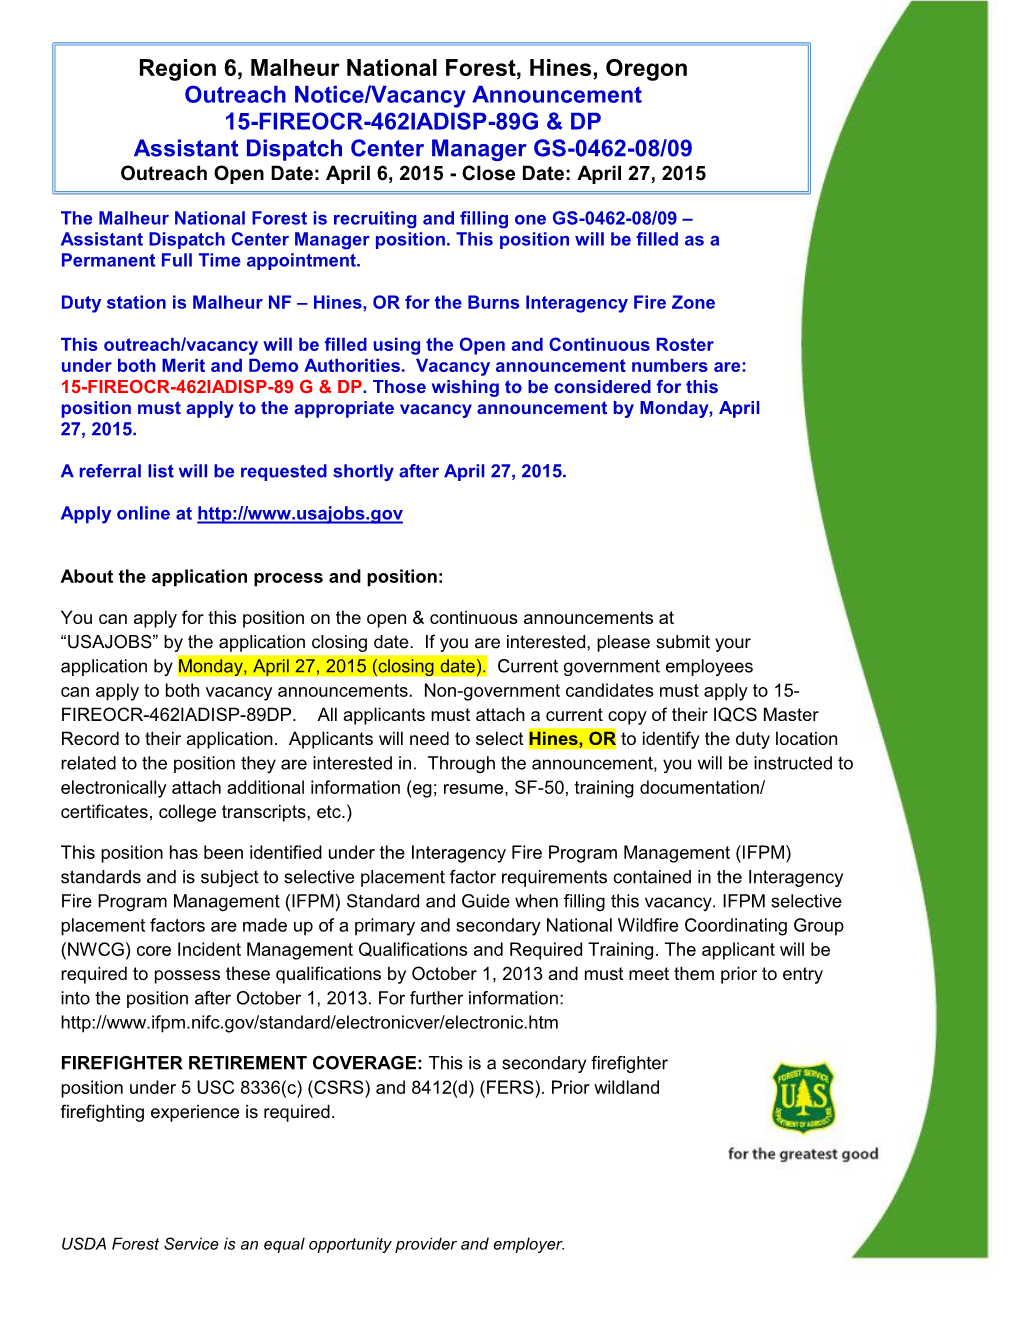 Region 6, Malheur National Forest, Hines, Oregon Outreach Notice